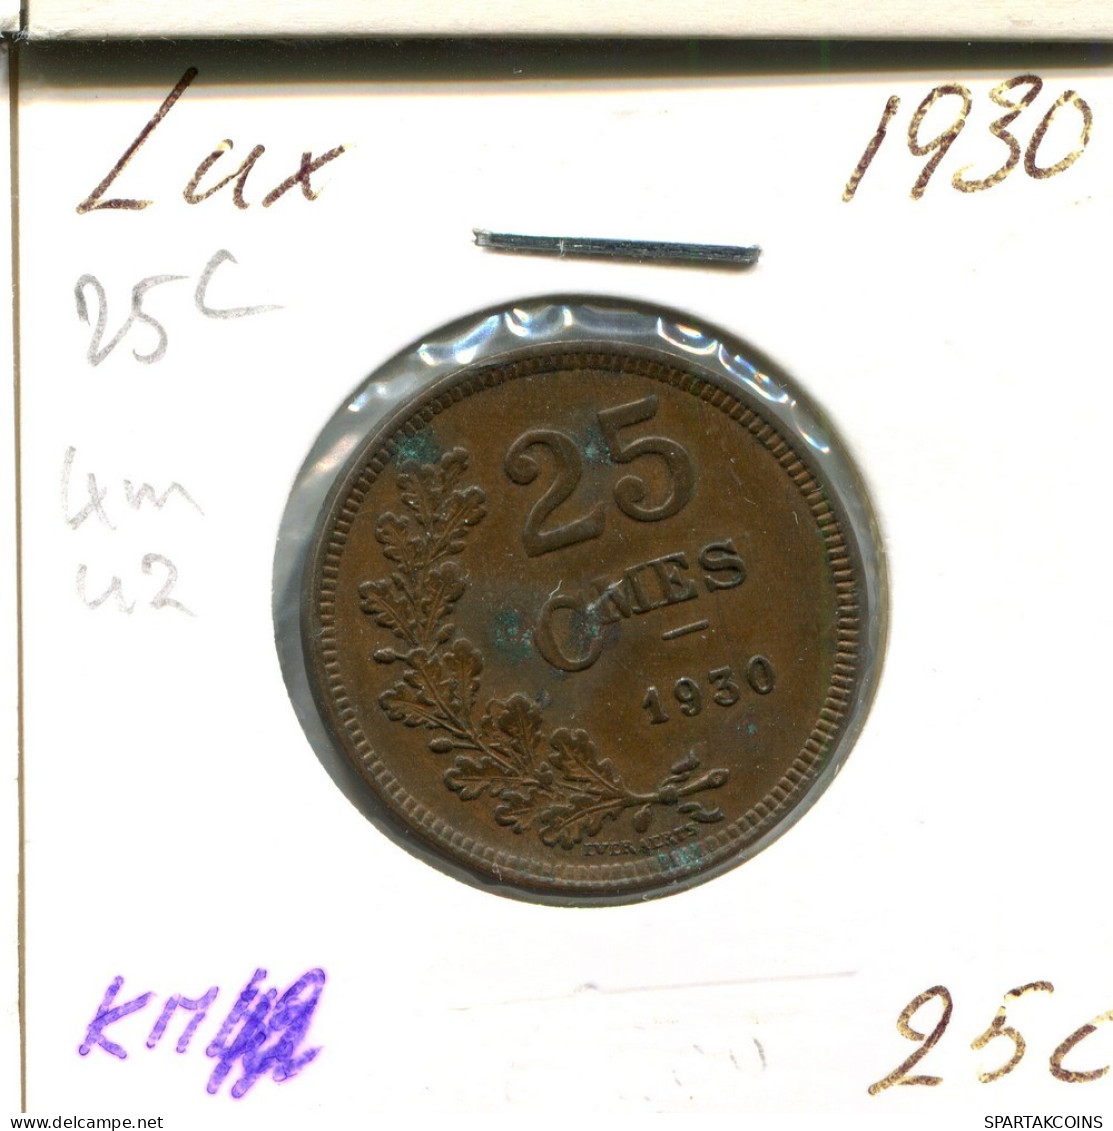 25 CENTIMES 1930 LUXEMBOURG Coin #AT189.U.A - Lussemburgo